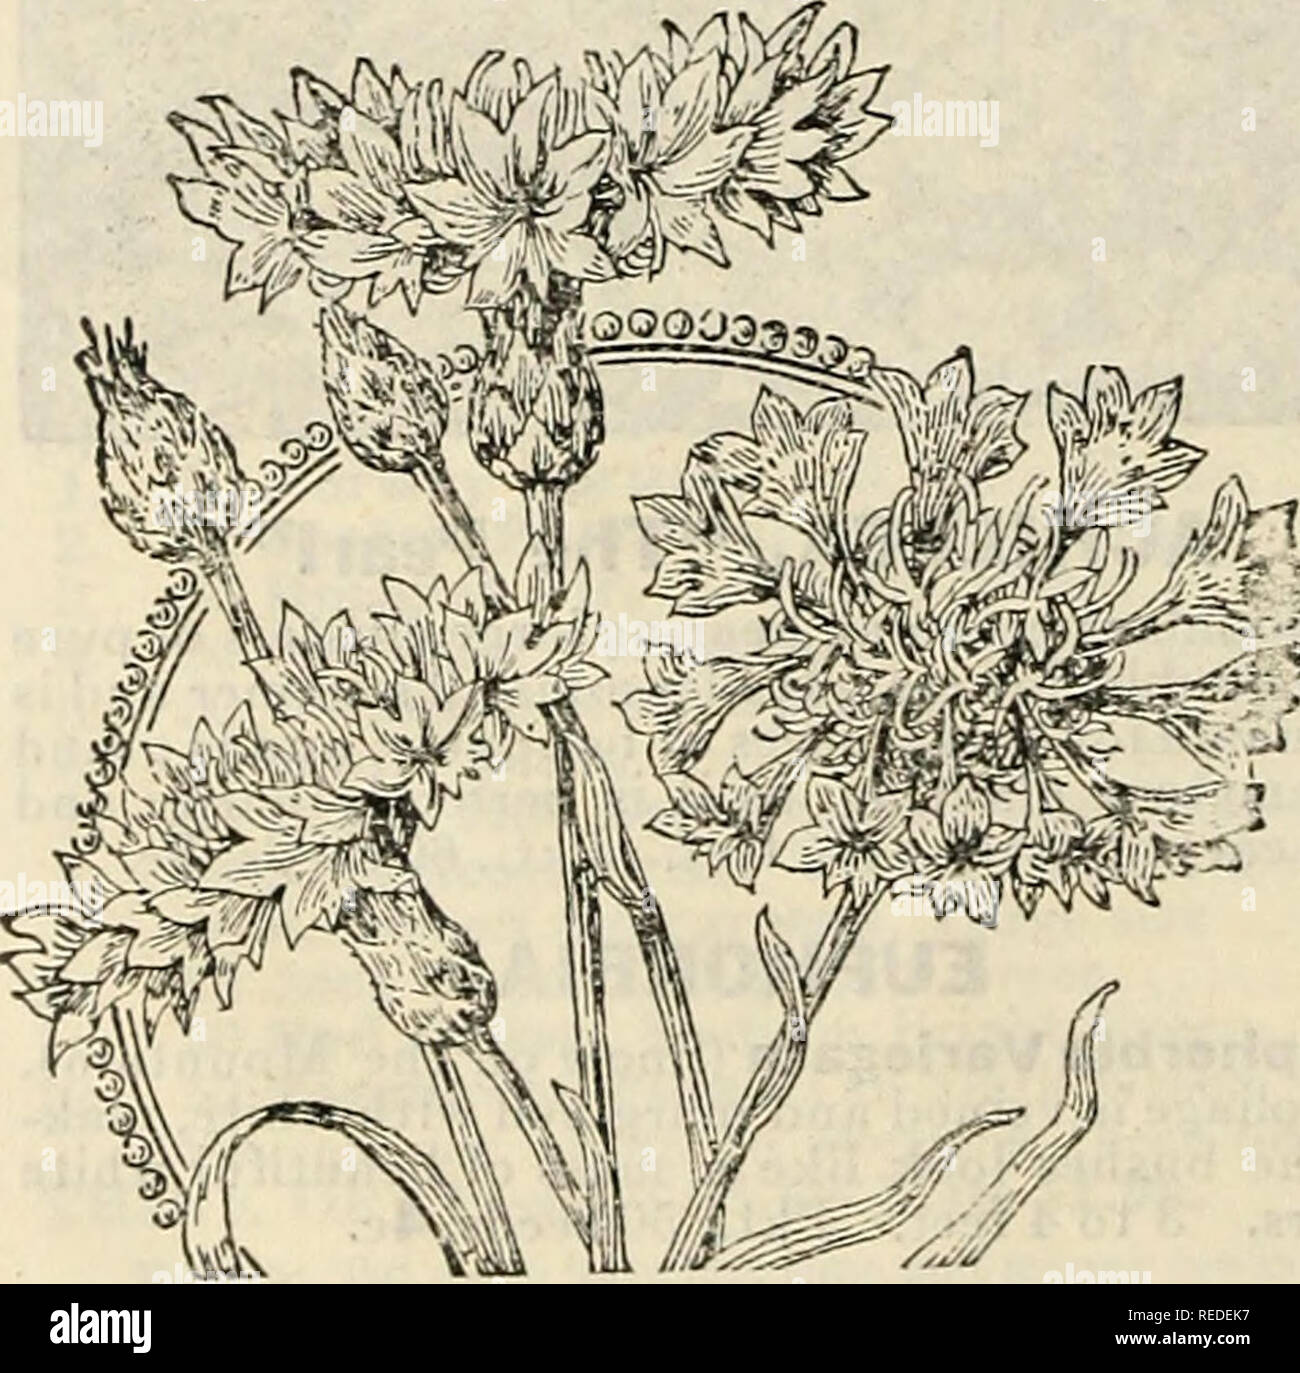 . Compliments of Miss Emma V. White. Flowers Seeds Catalogs; Seeds Catalogs; Vegetables Seeds Catalogs. 18â New Brunswick, N. J. â&quot;My Bachelor Buttoni were beautiful. I never before saw such large ones or so many colors.&quot;âGretta C. Bryan. BACHELOR'S BUTTON (Centaurea Cyanus) Also known as &quot;Corn Flower,&quot; &quot;Blue Bottle, and &quot;Ragged Sailor,&quot; The blues with such yel- low flowers as California Poppy, Calendula or other Marigolds make a striking combination. VA feet. Price, each per pkt., 5c; any 3 pkts., 12c. Double Blue. Deep blue, semi-double flow- ers, one of th Stock Photo